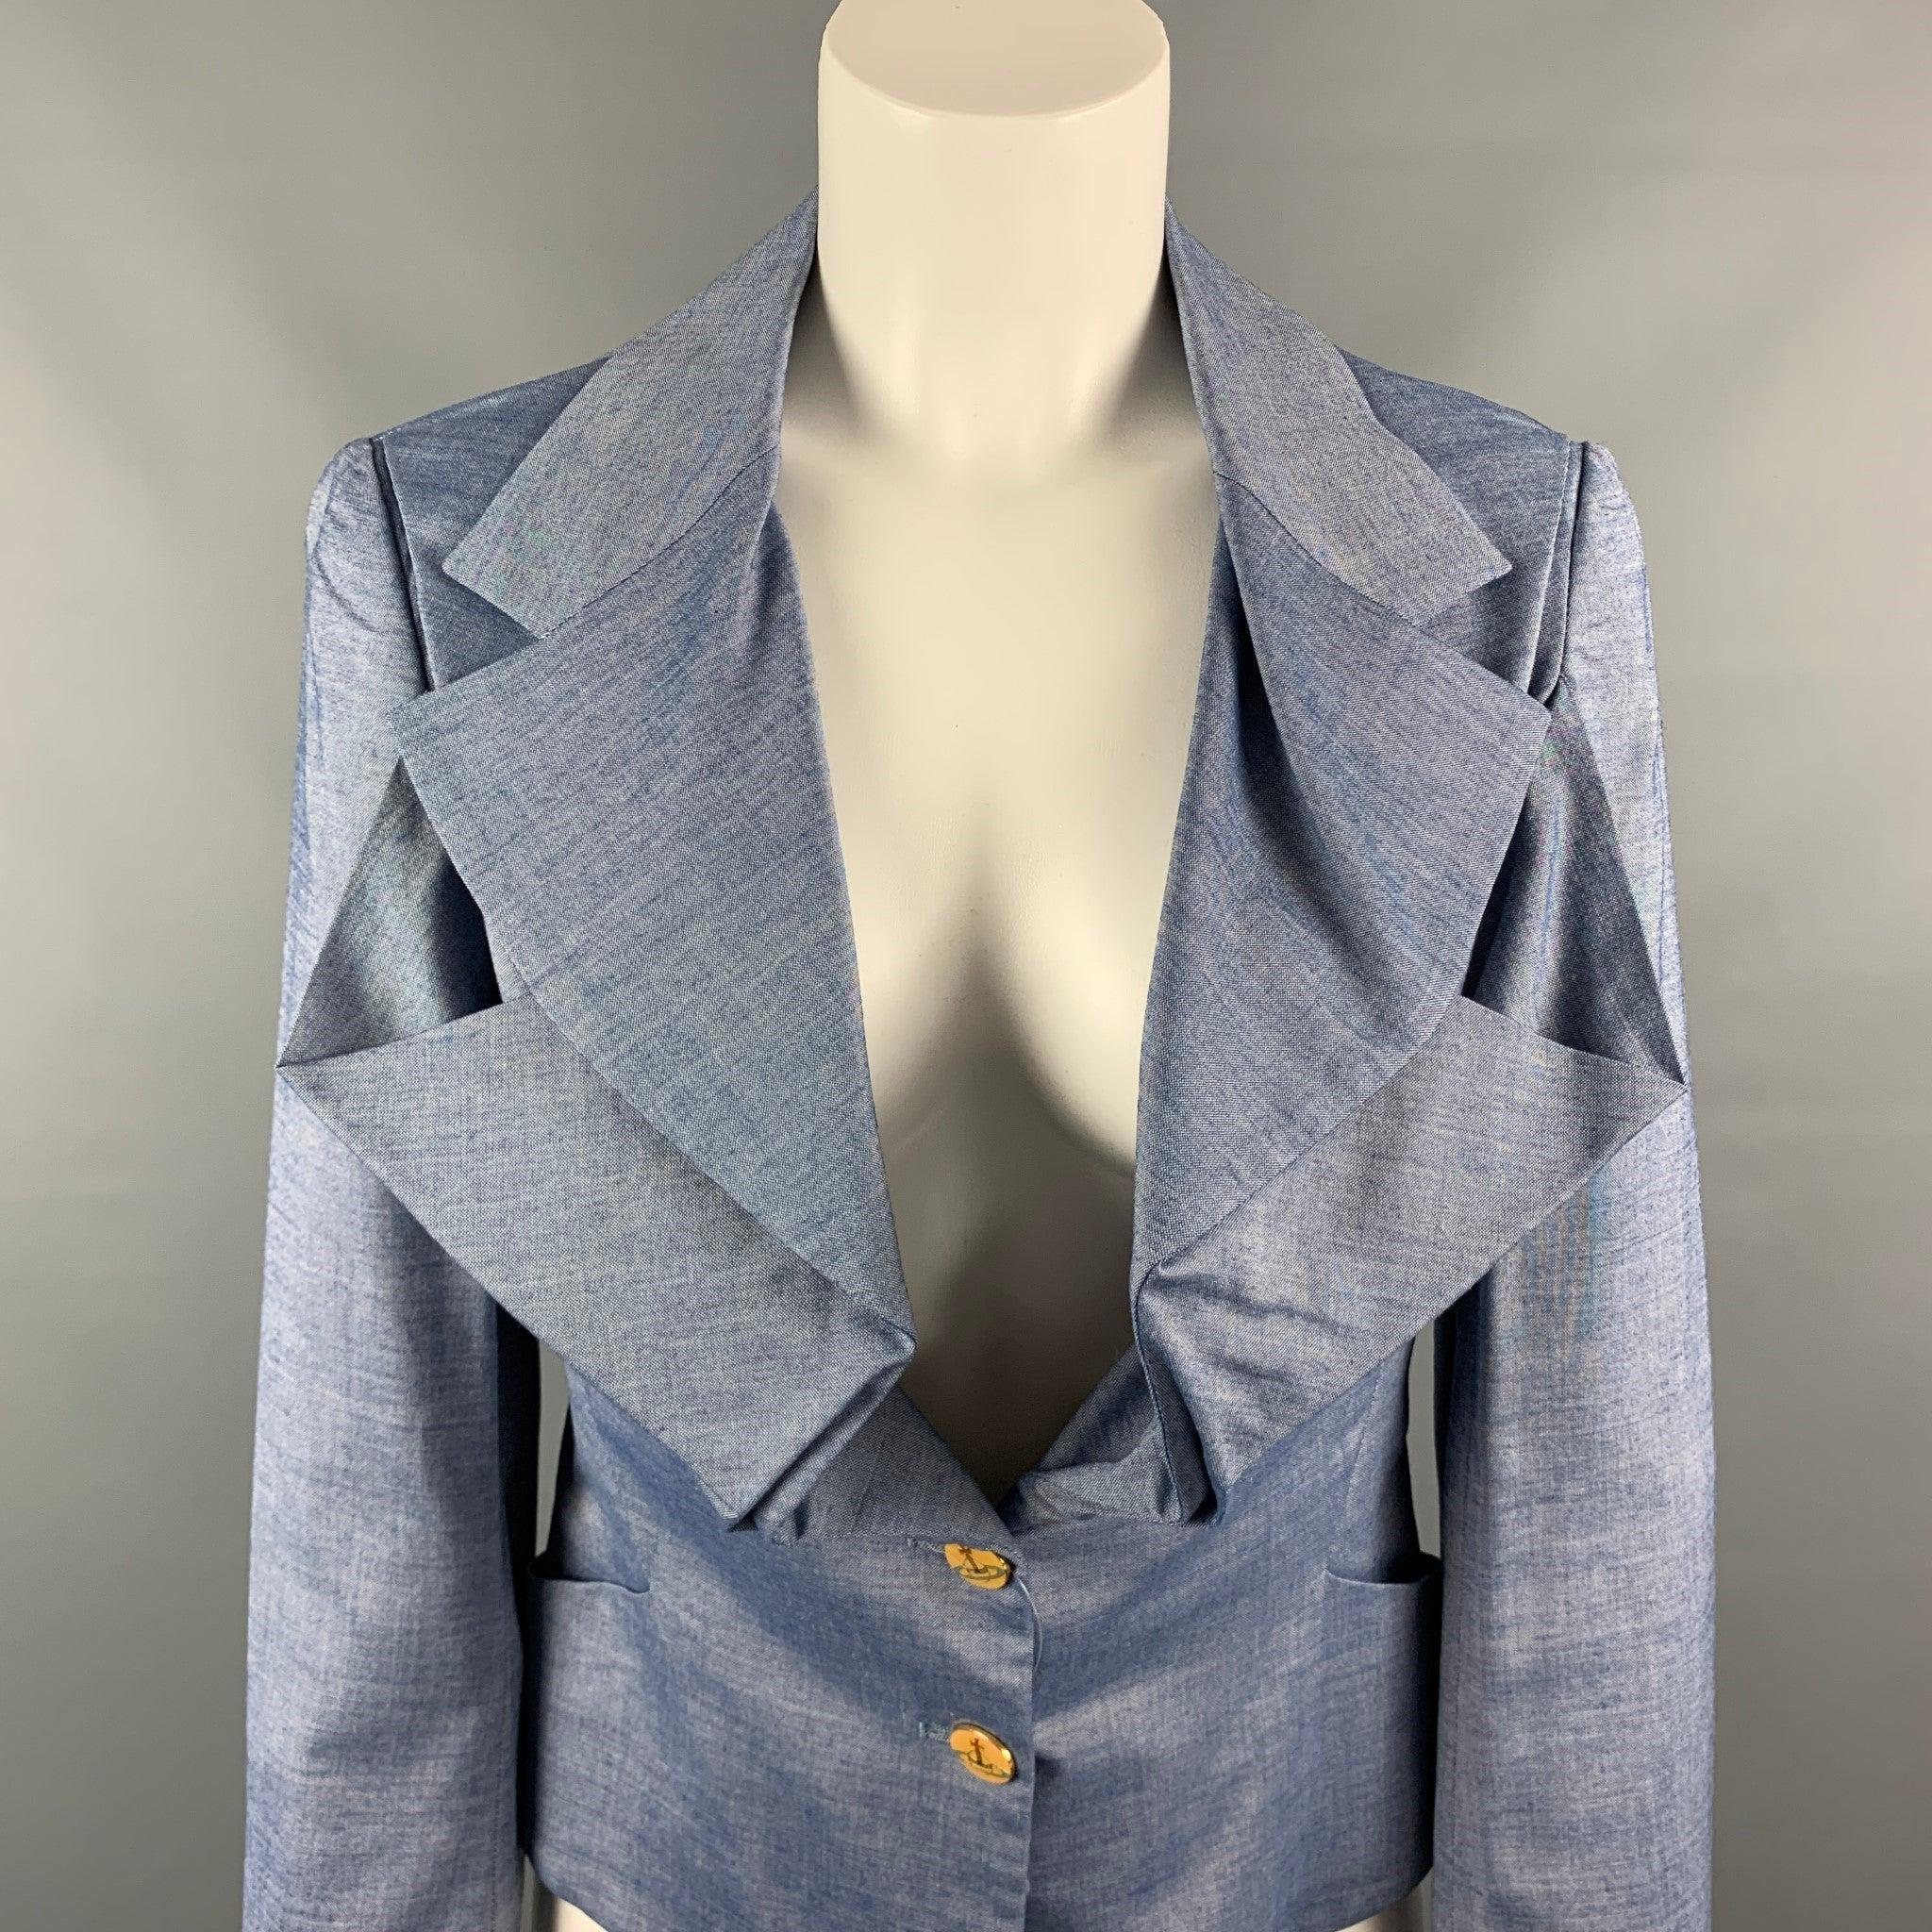 VIVIENNE WESTWOOD RED LABEL jacket comes in a blue wool blend with a full monogram print liner featuring a large ruffled collar, slit pockets, and a double buttoned closure. Very Good Pre-Owned Condition. 

Marked:   42 

Measurements: 
 
Shoulder: